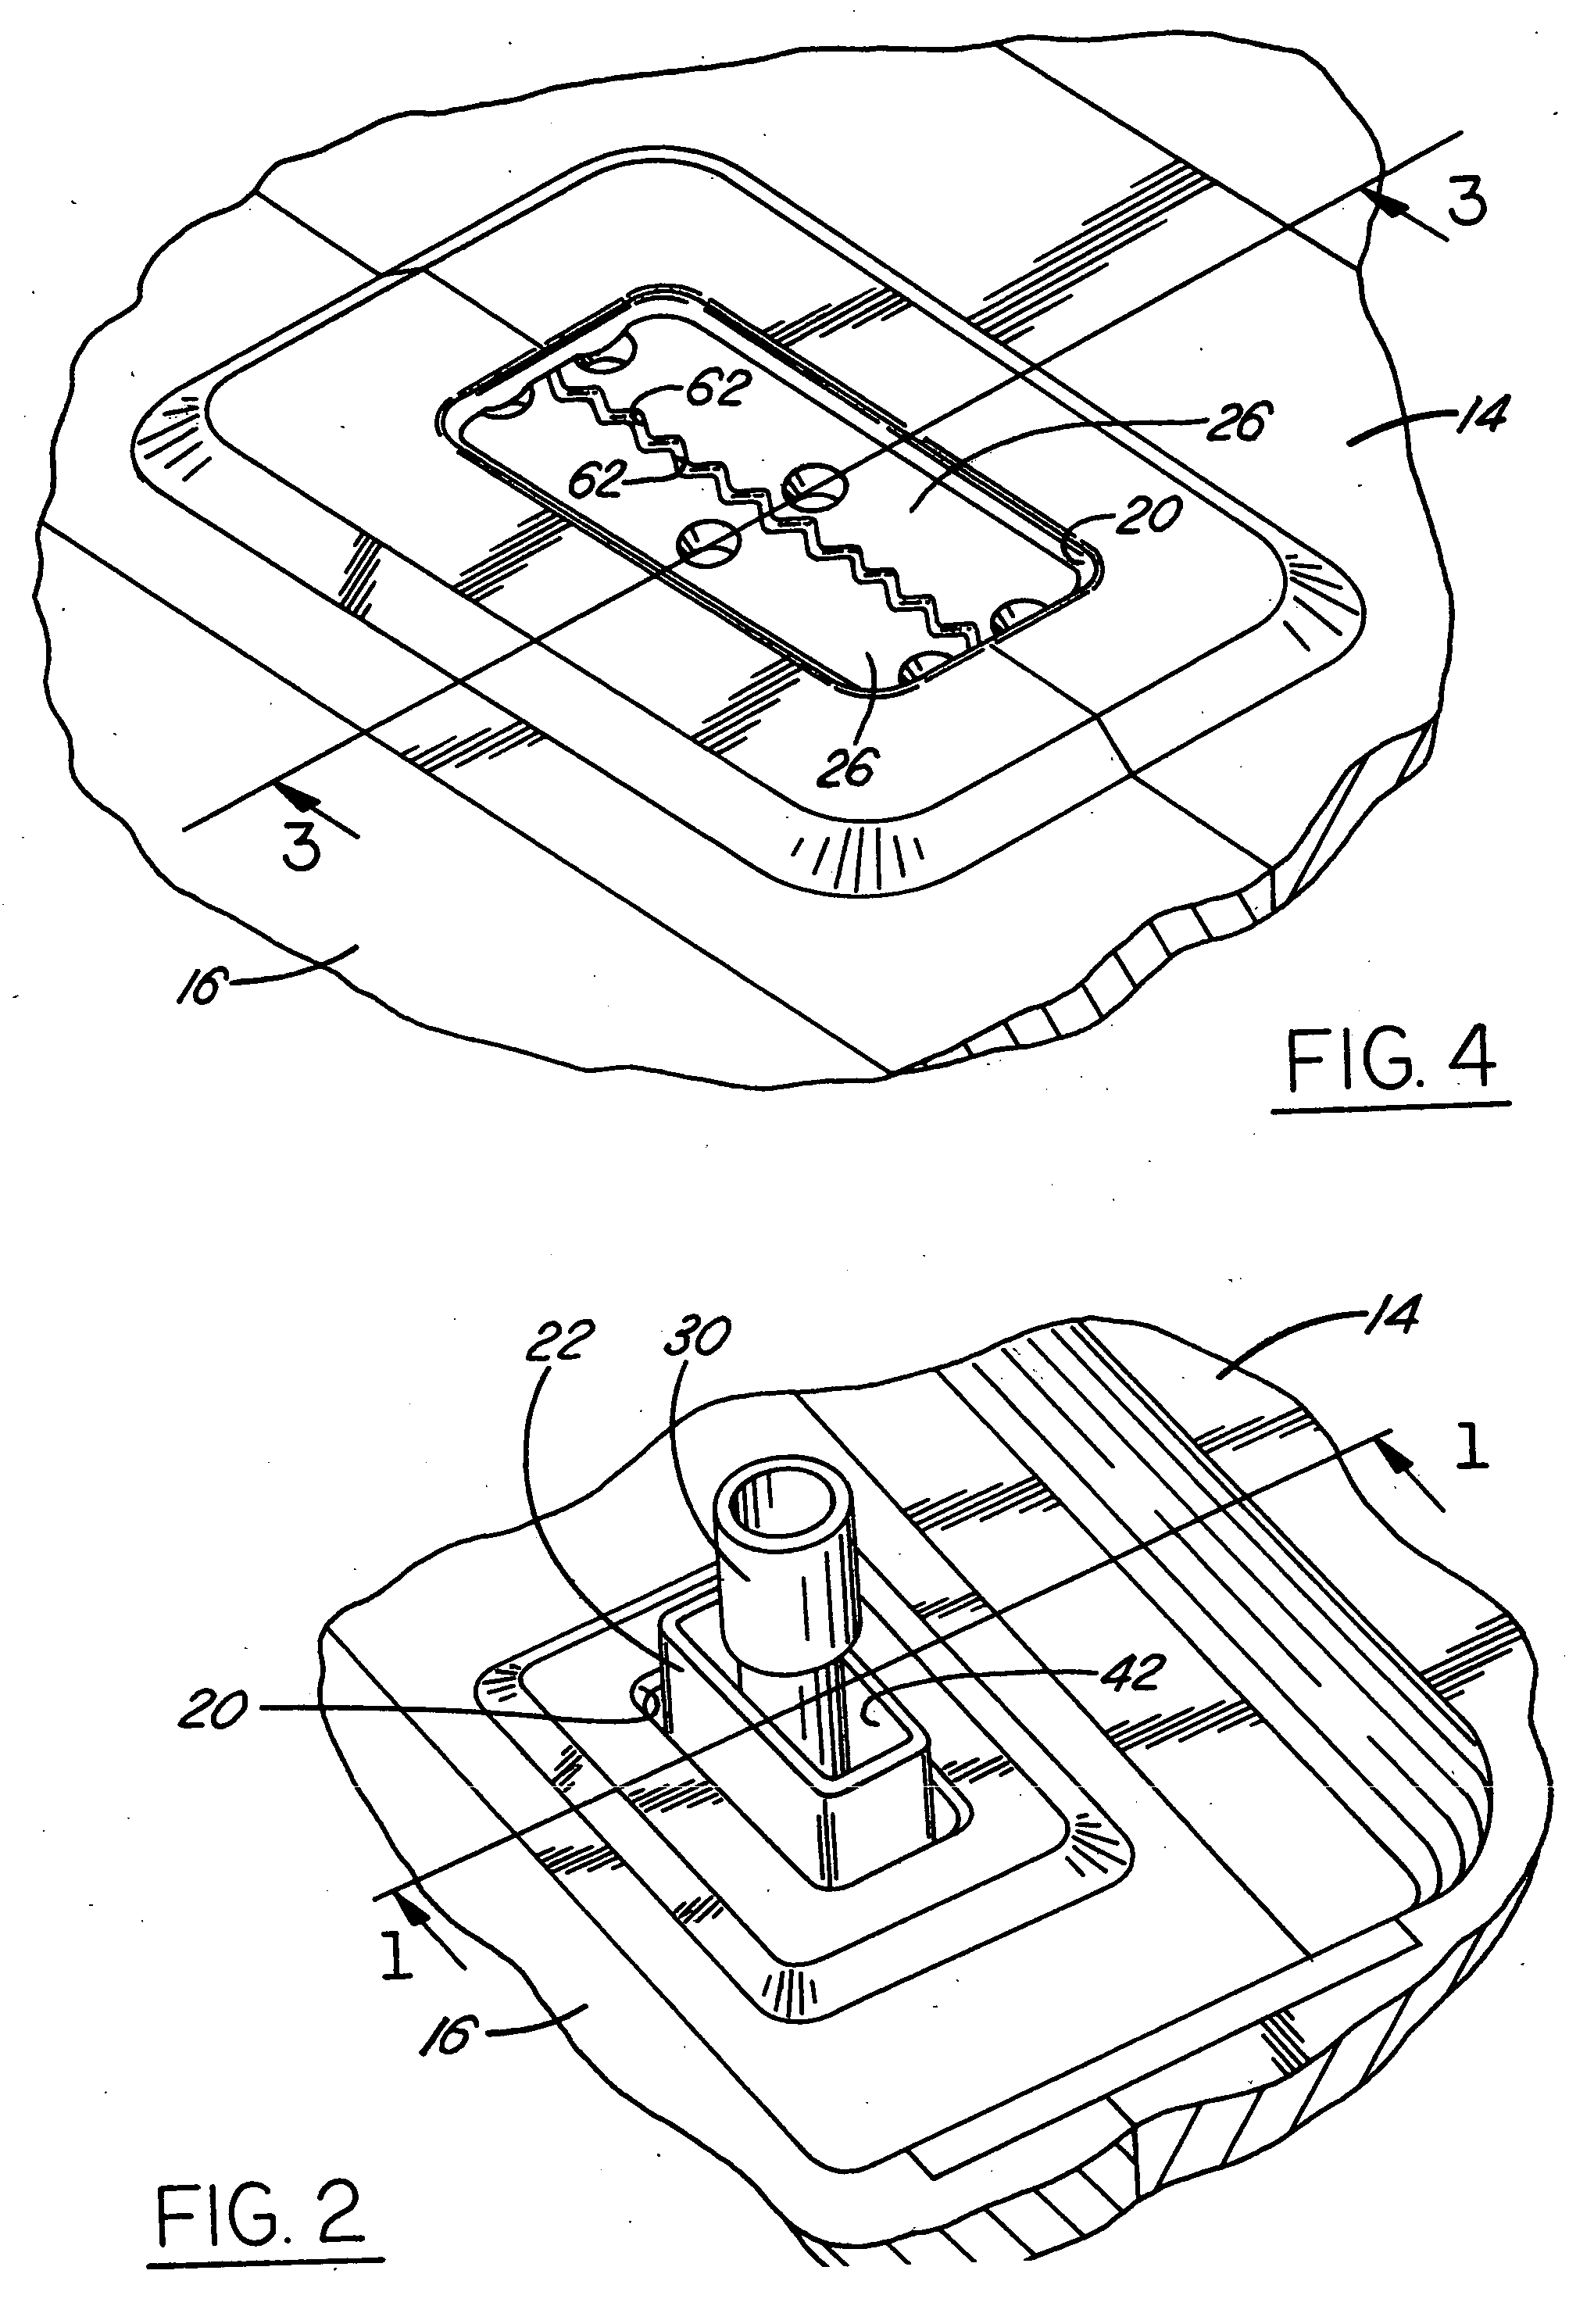 Method and apparatus for making a blow molded fuel tank